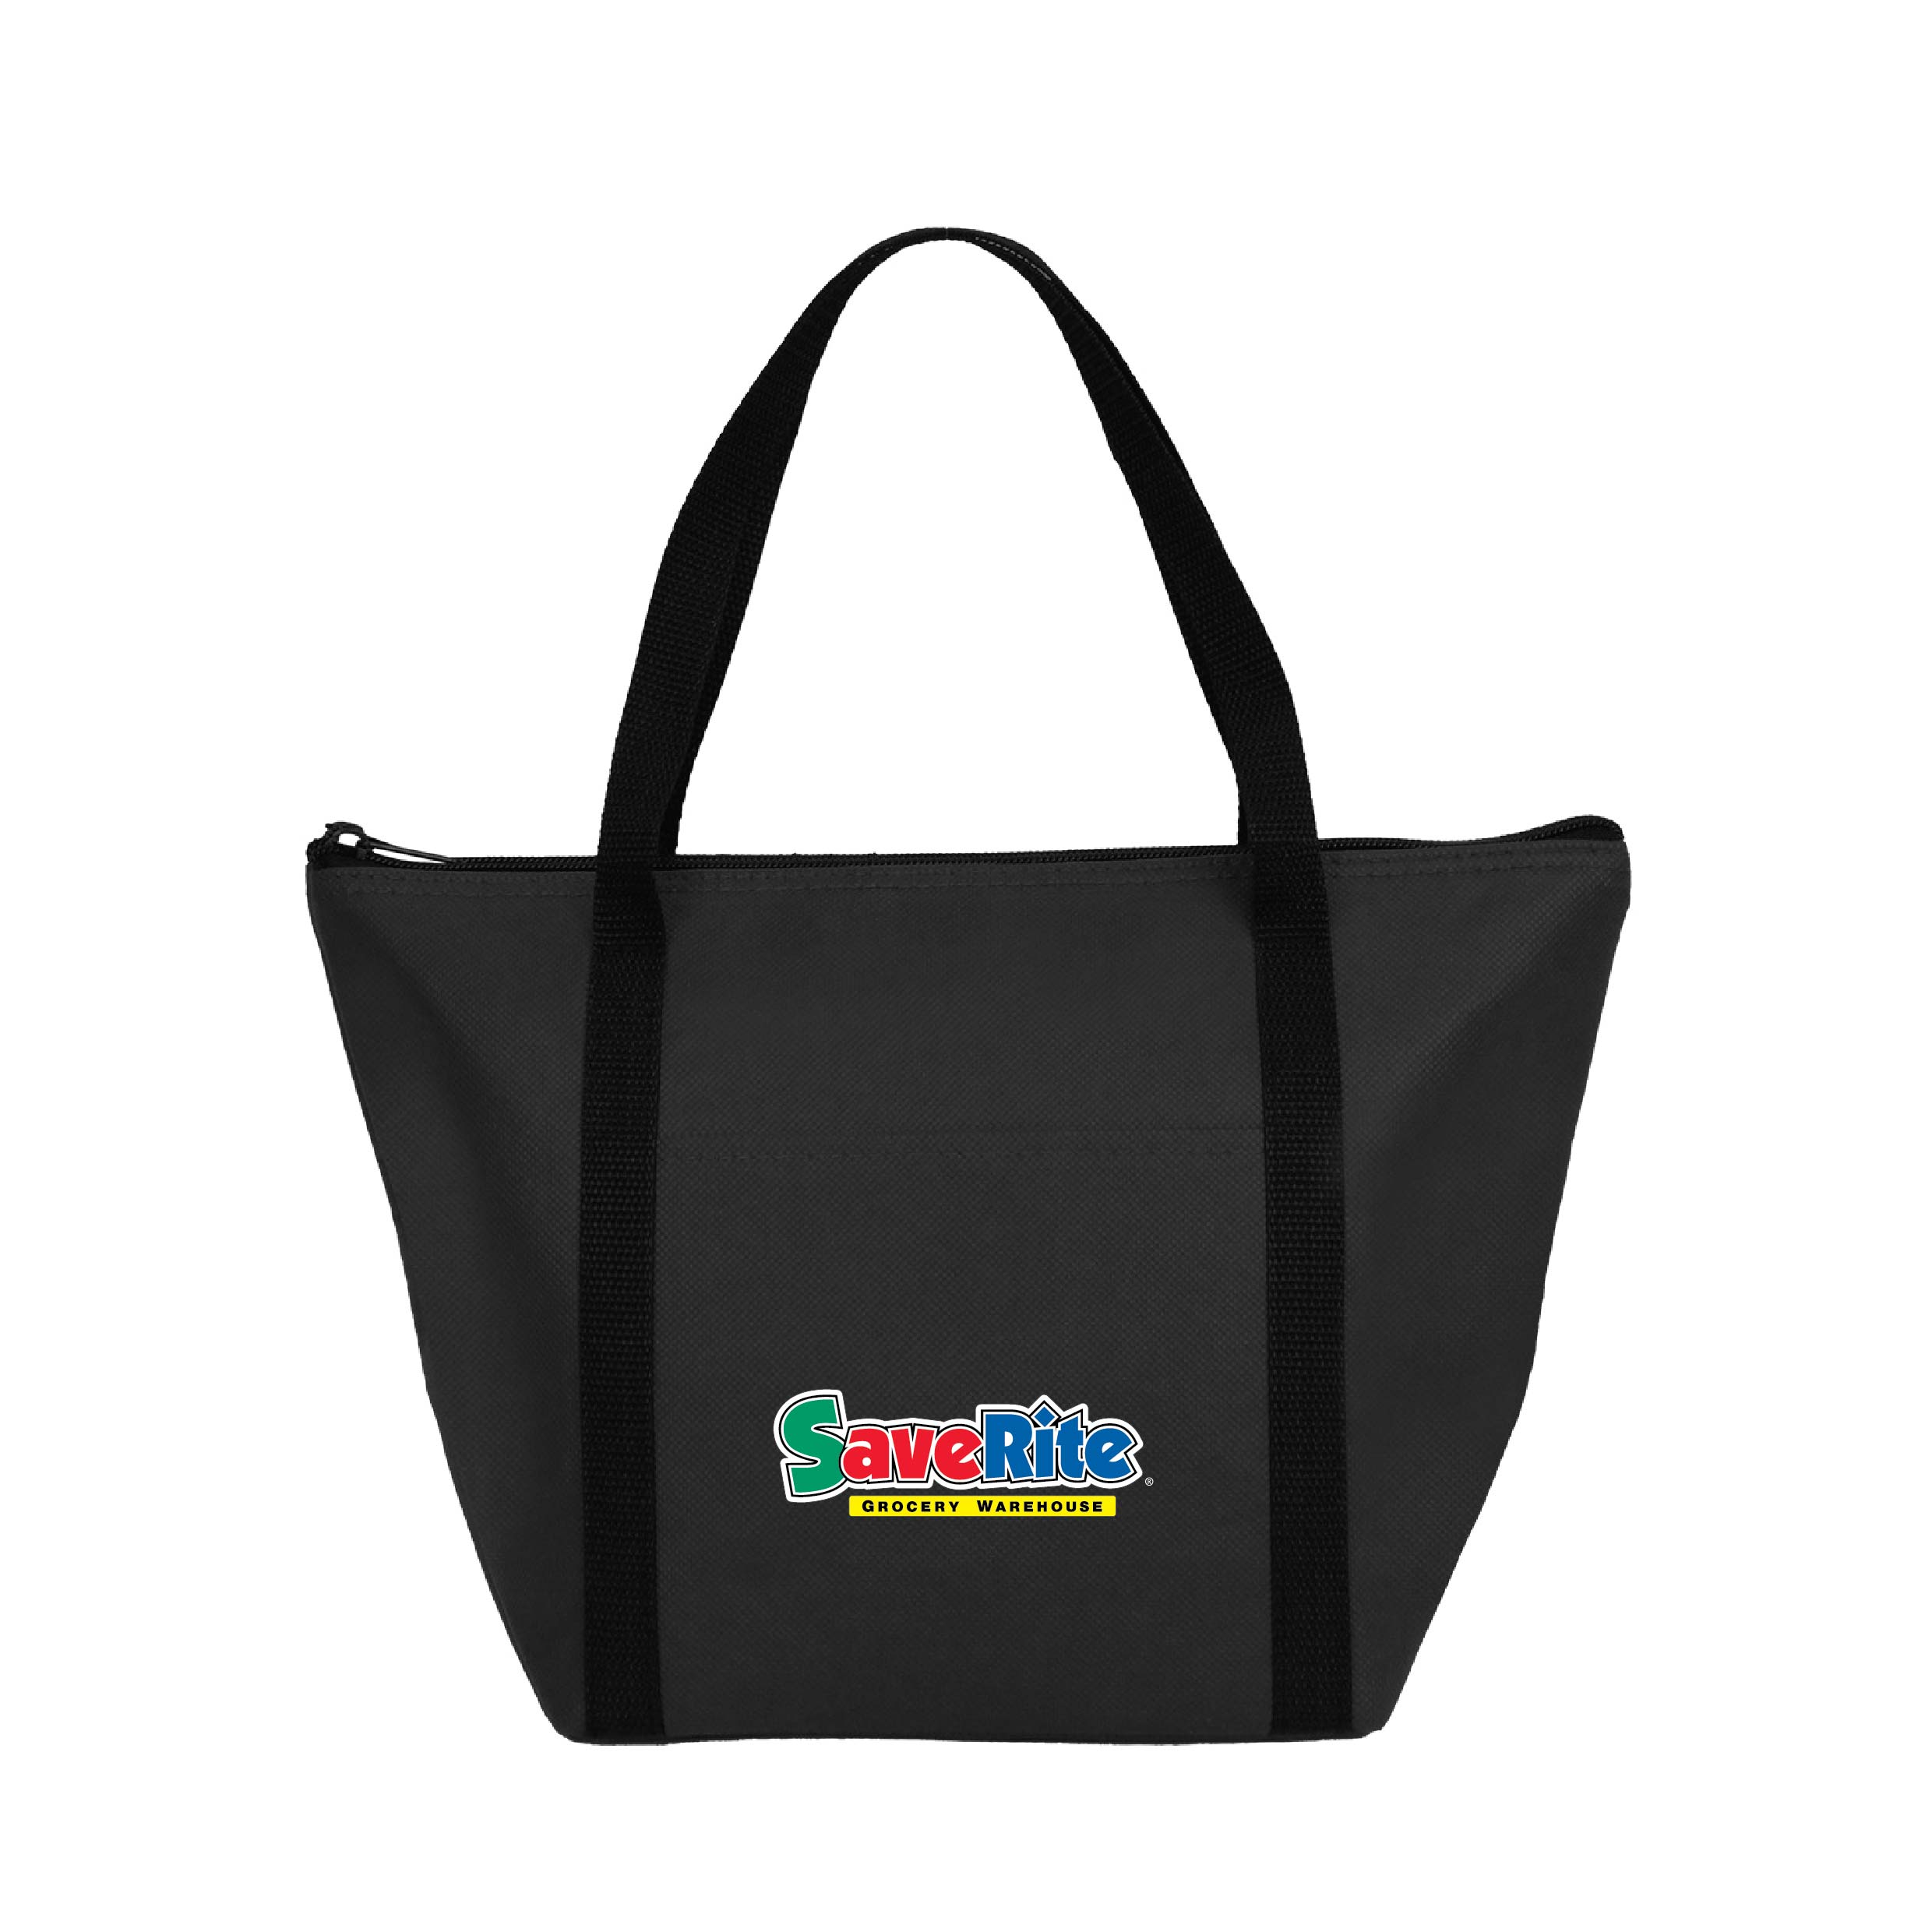 GREGORY NON WOVEN INSULATED LUNCH TOTE